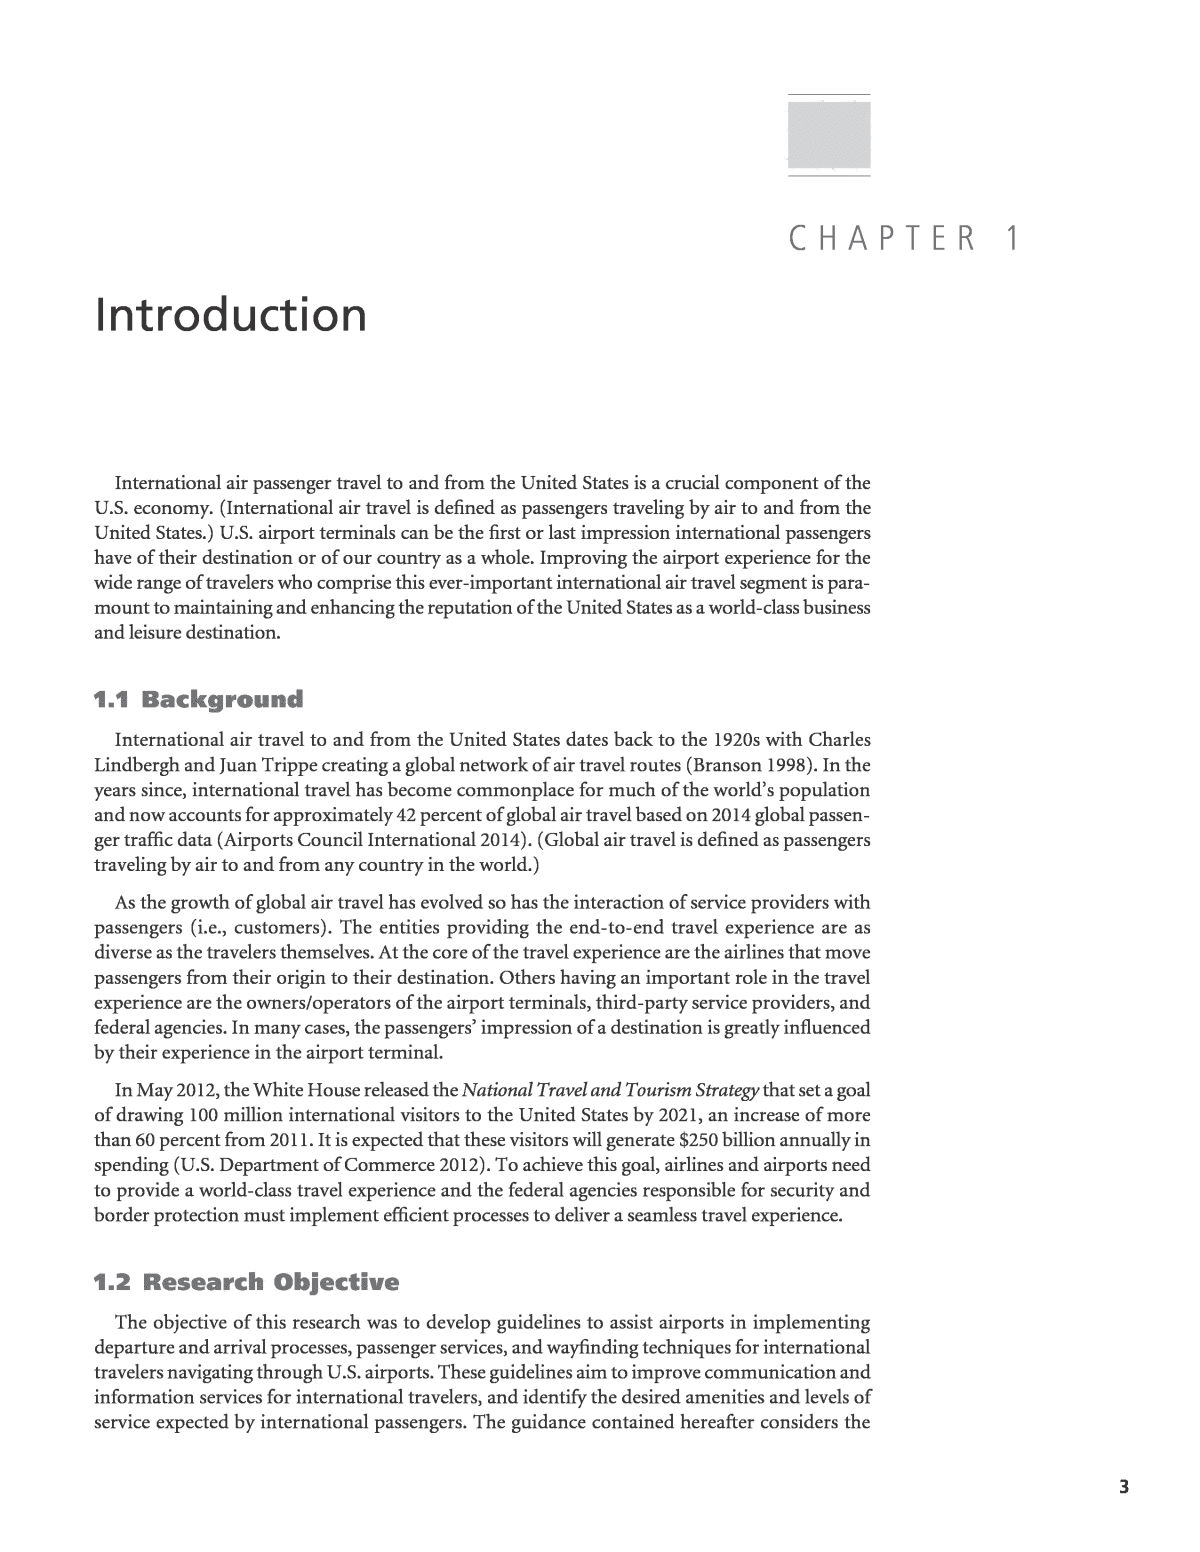 Computer science phd thesis download